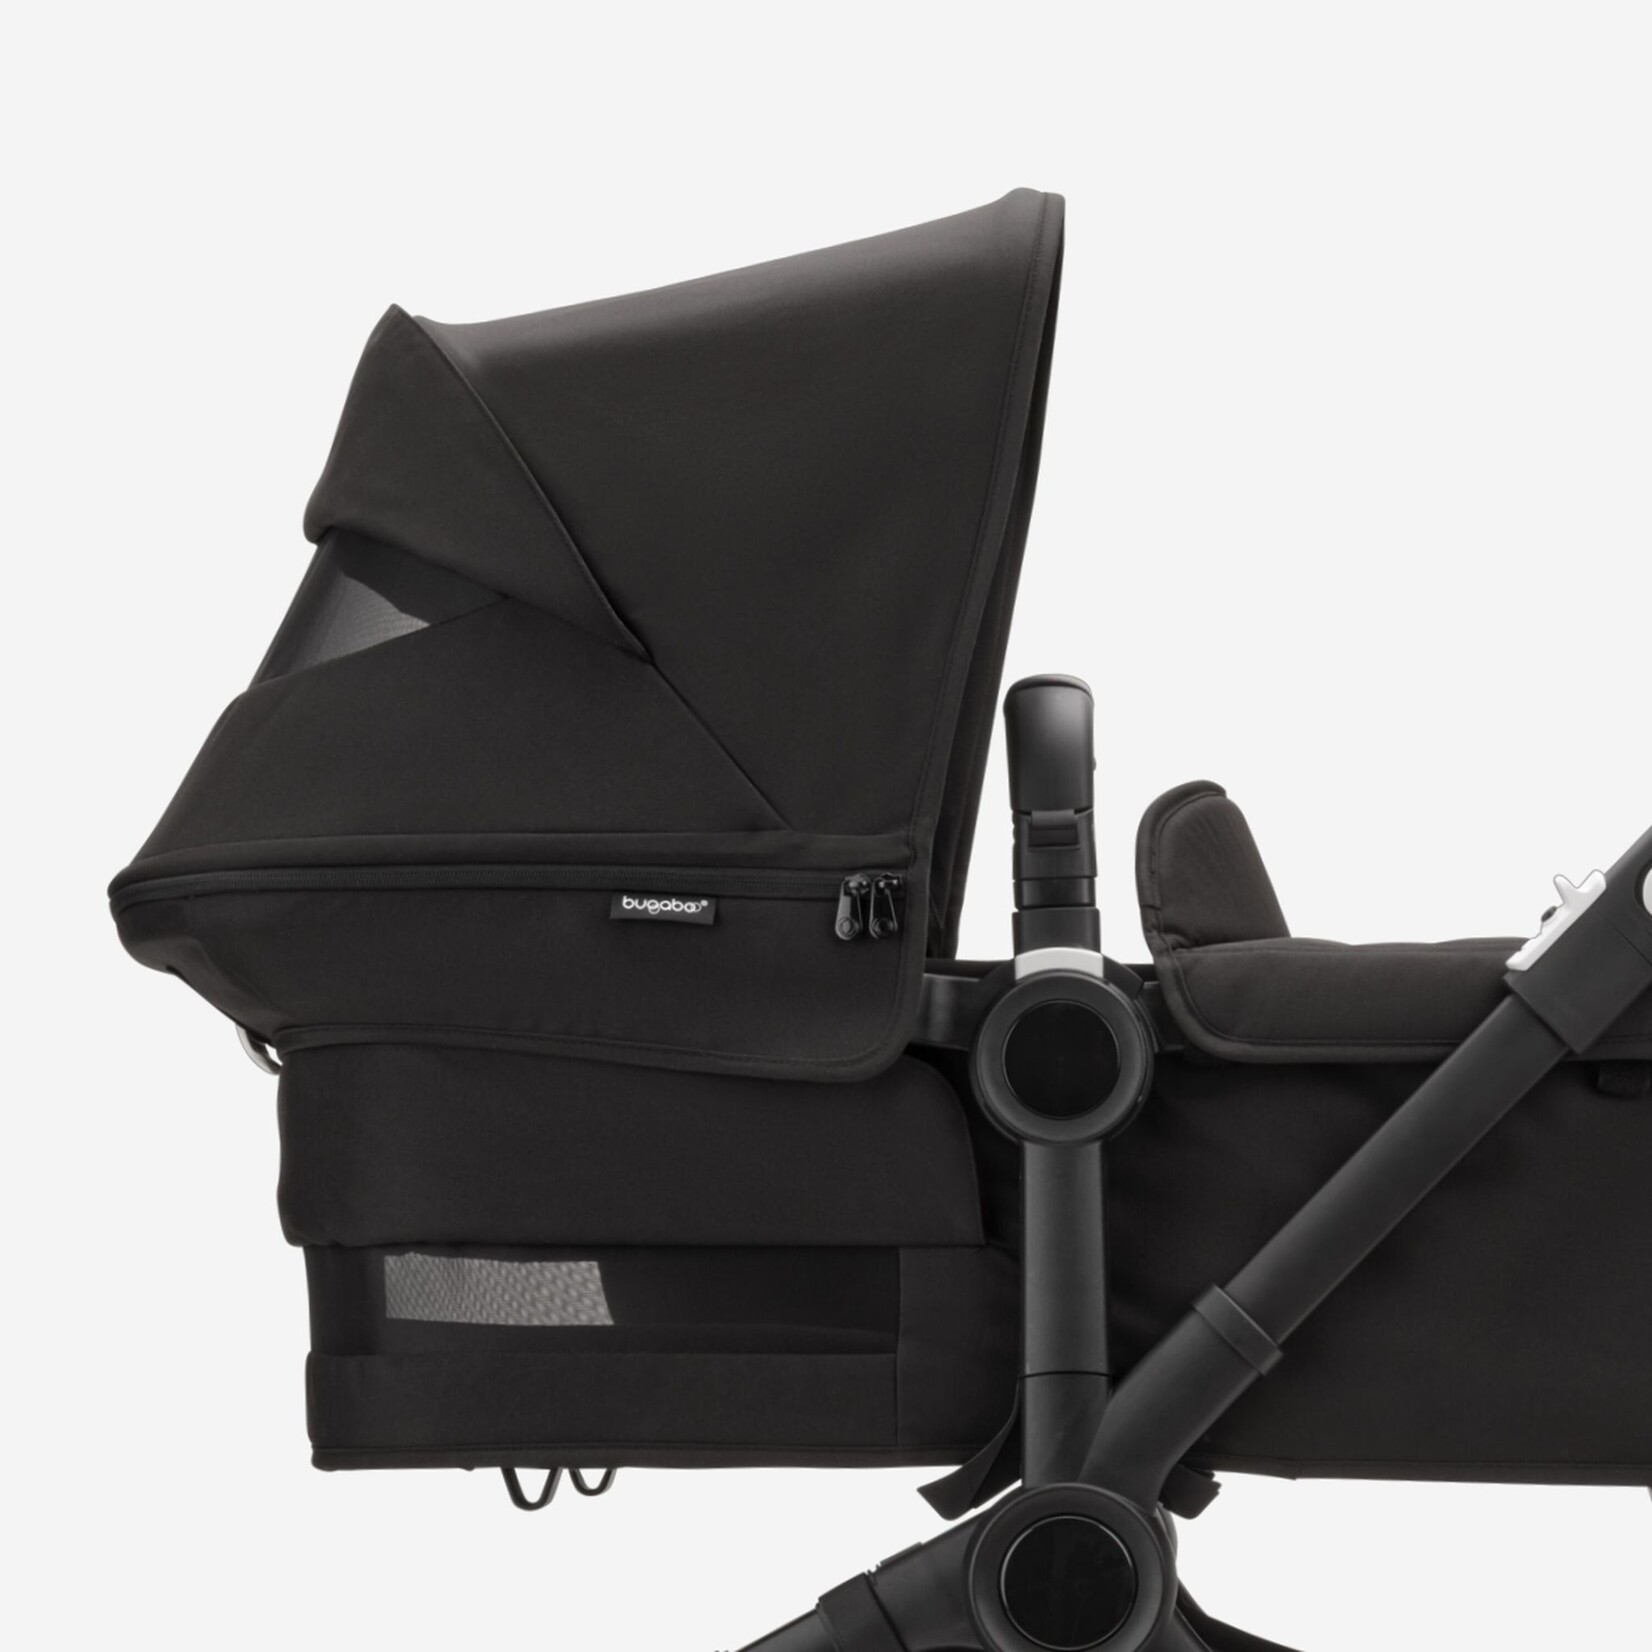 Bugaboo Donkey 5 Duo bassinet and seat pram-Forest green sun canopy, forest green fabrics, black chassis